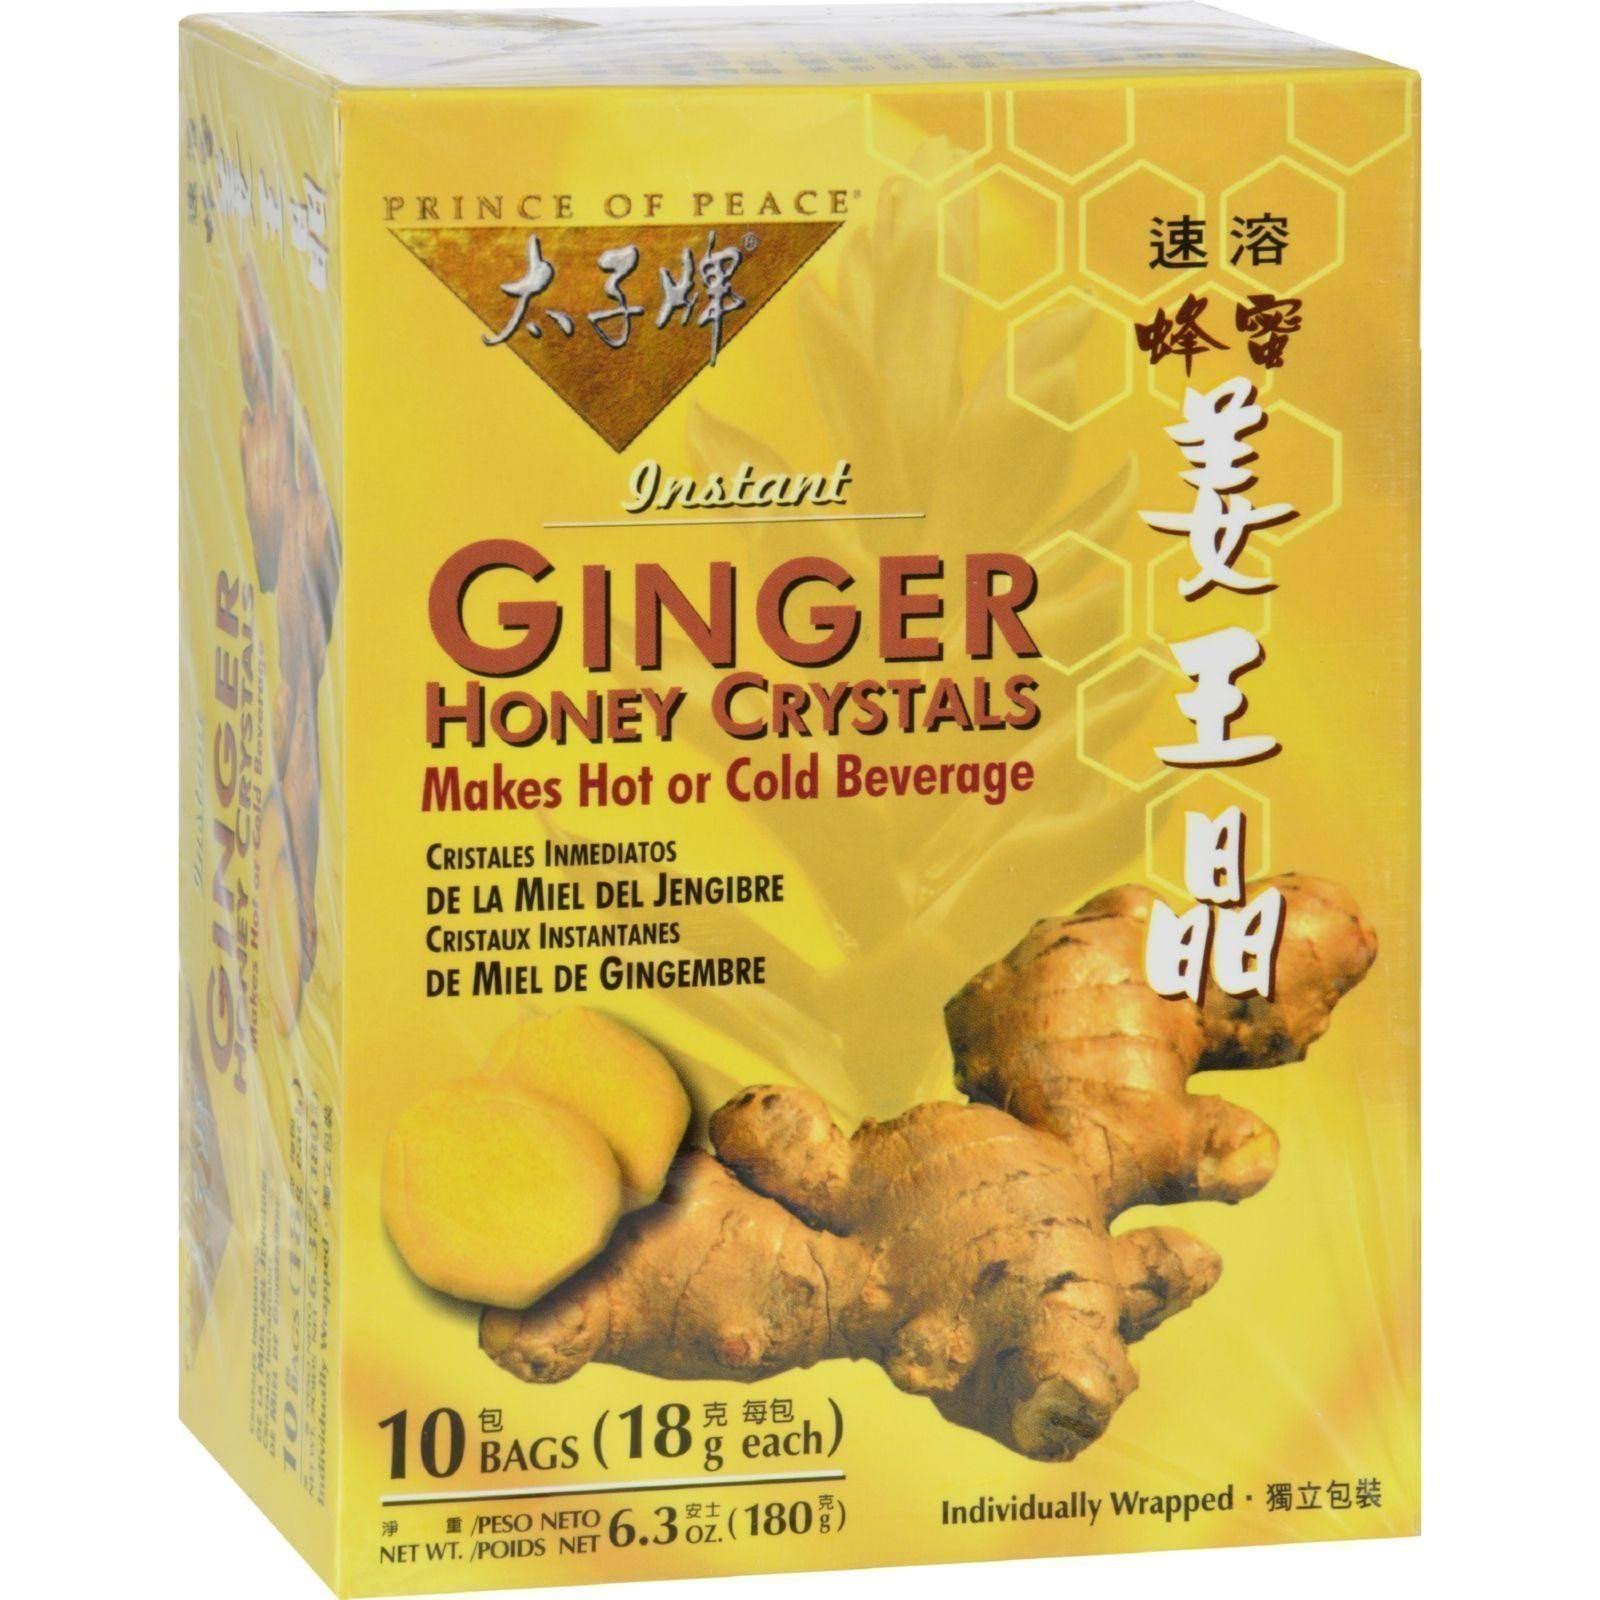 Prince Of Peace: Instant Ginger Honey Crystals, 10 Bags